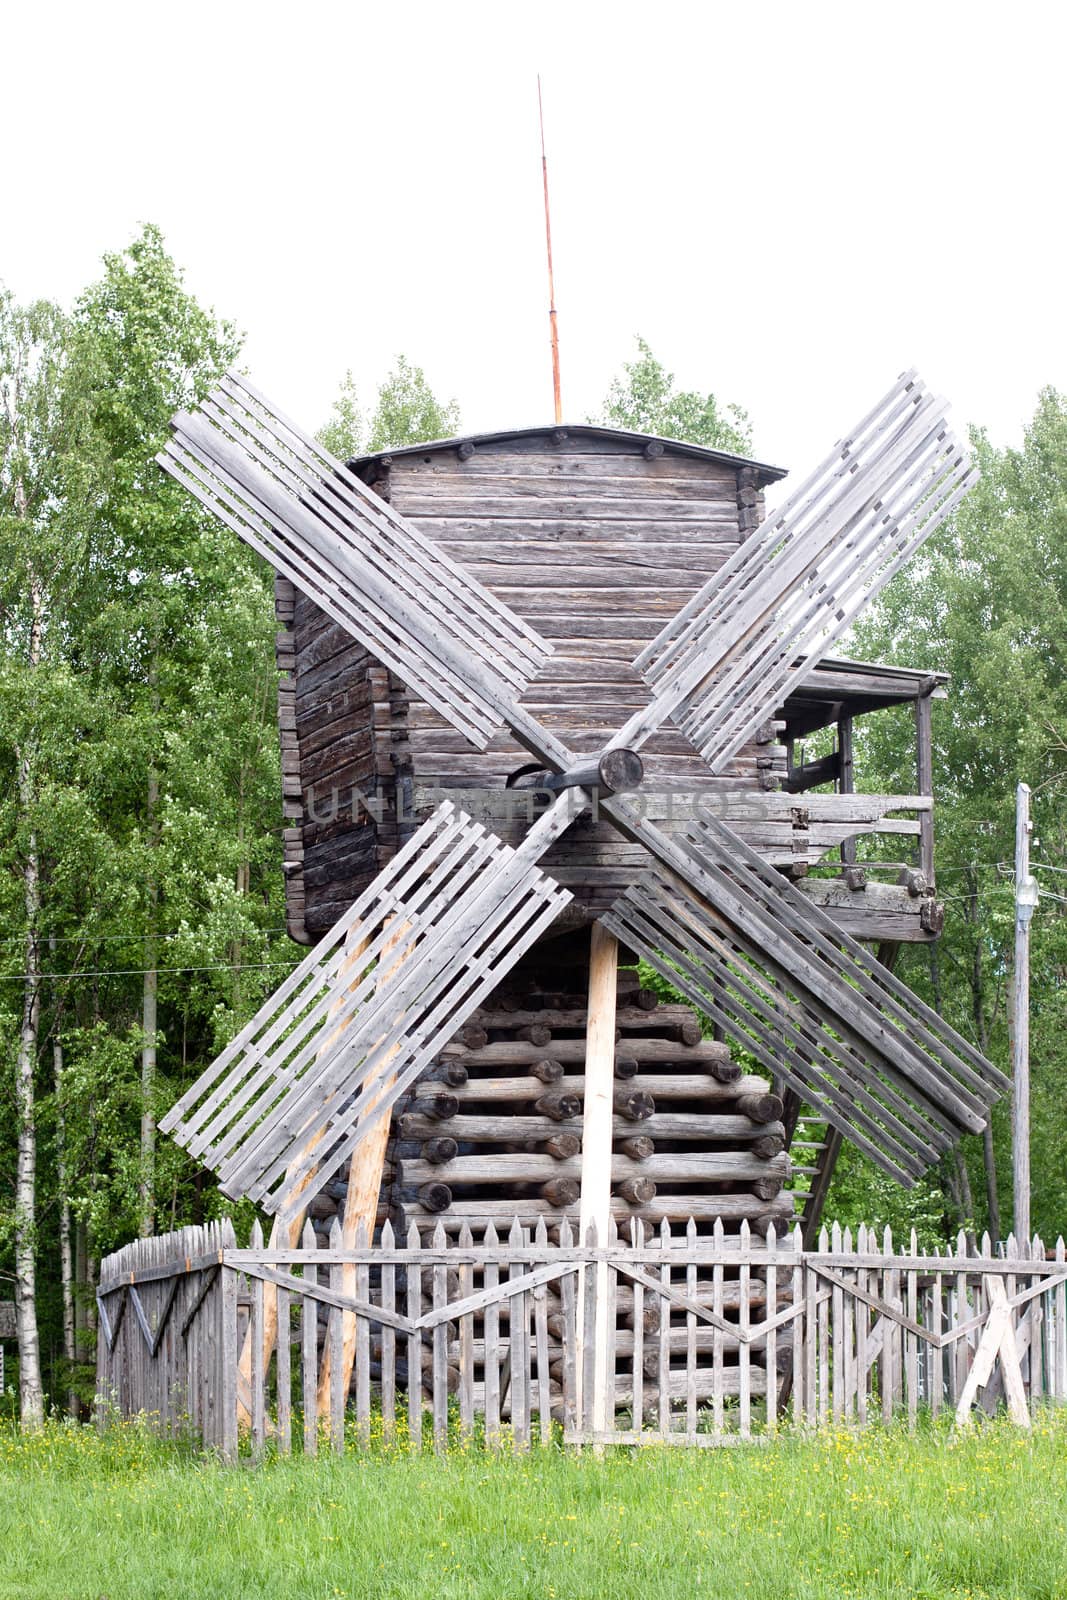 A traditional wooden russian windmill in front of a forest
